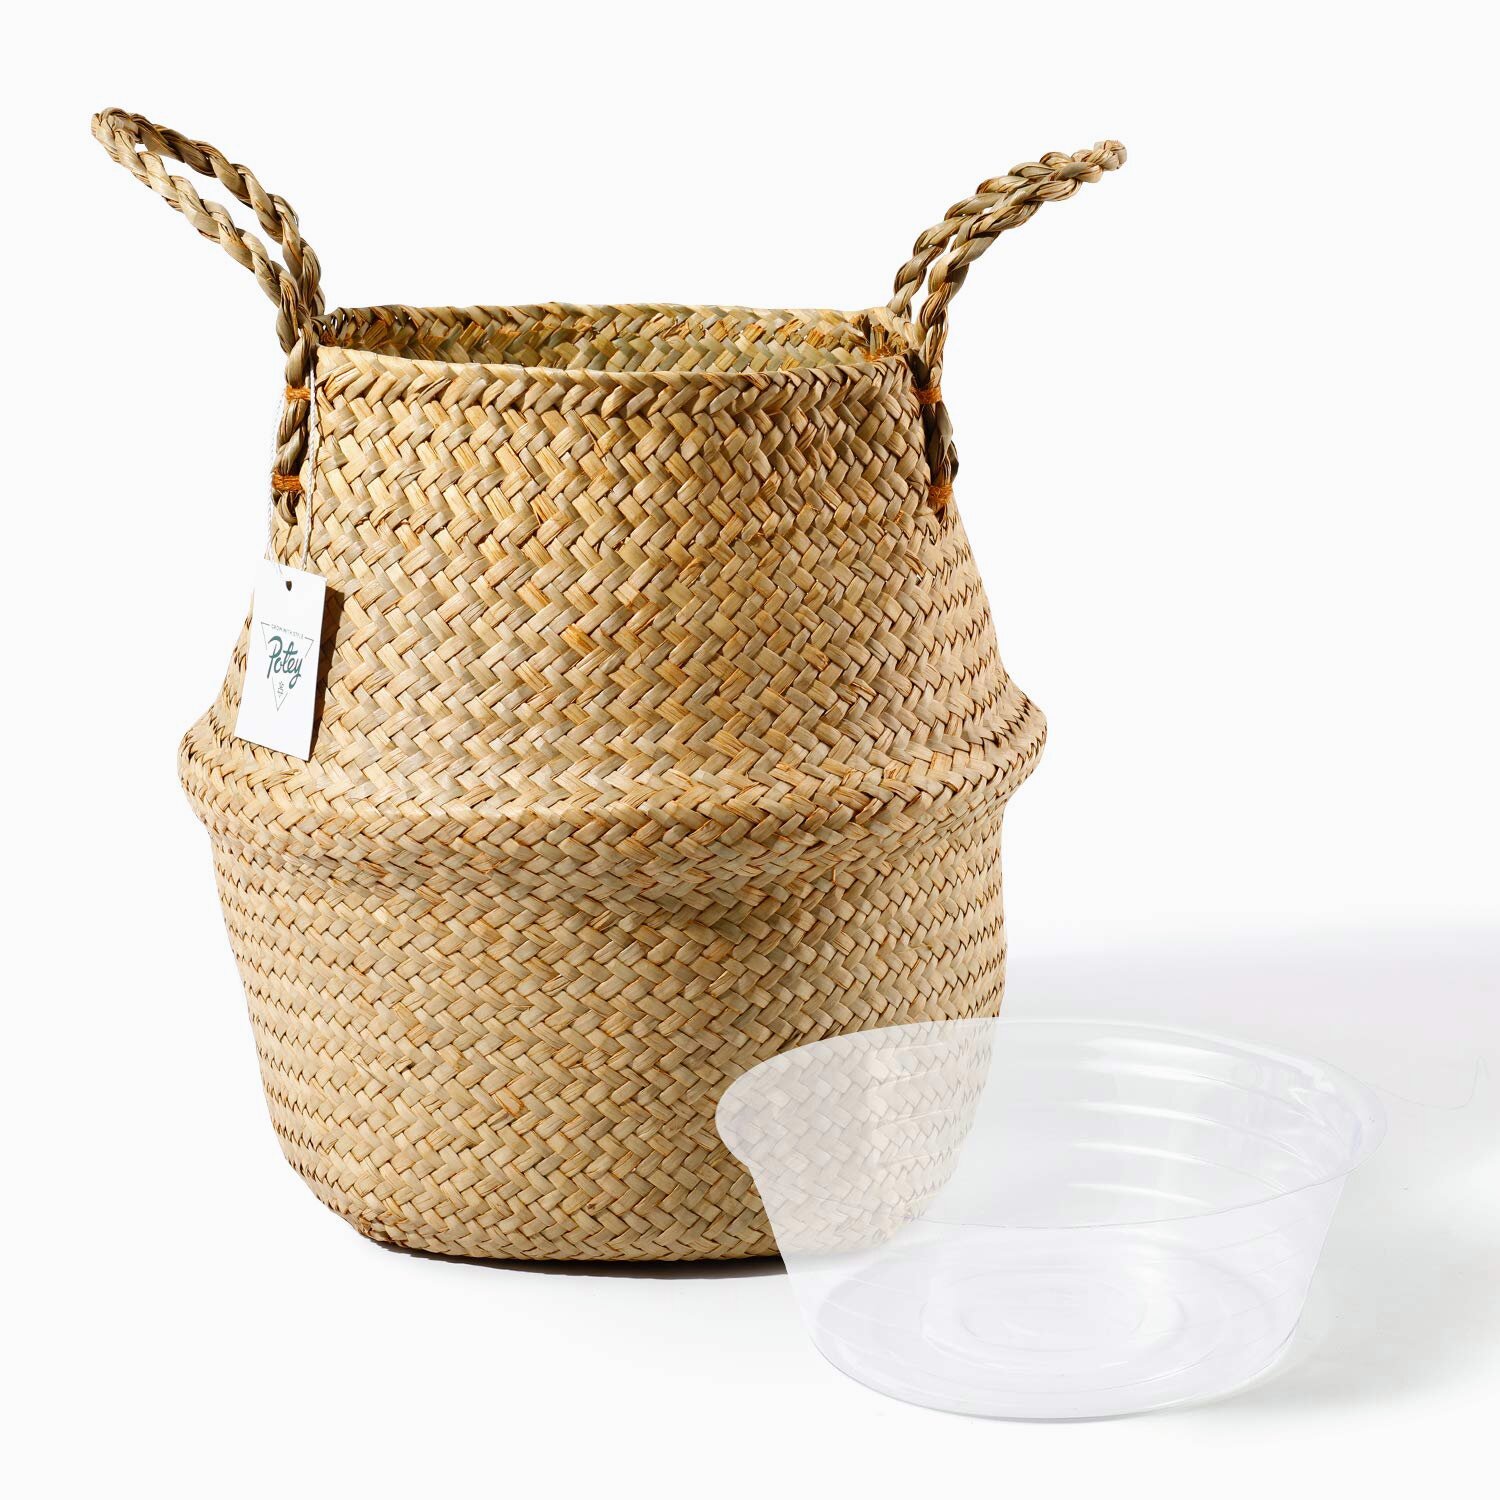 New Foldable Seagrass Belly Basket Plant Pot Laundry Basket Home Decoration 